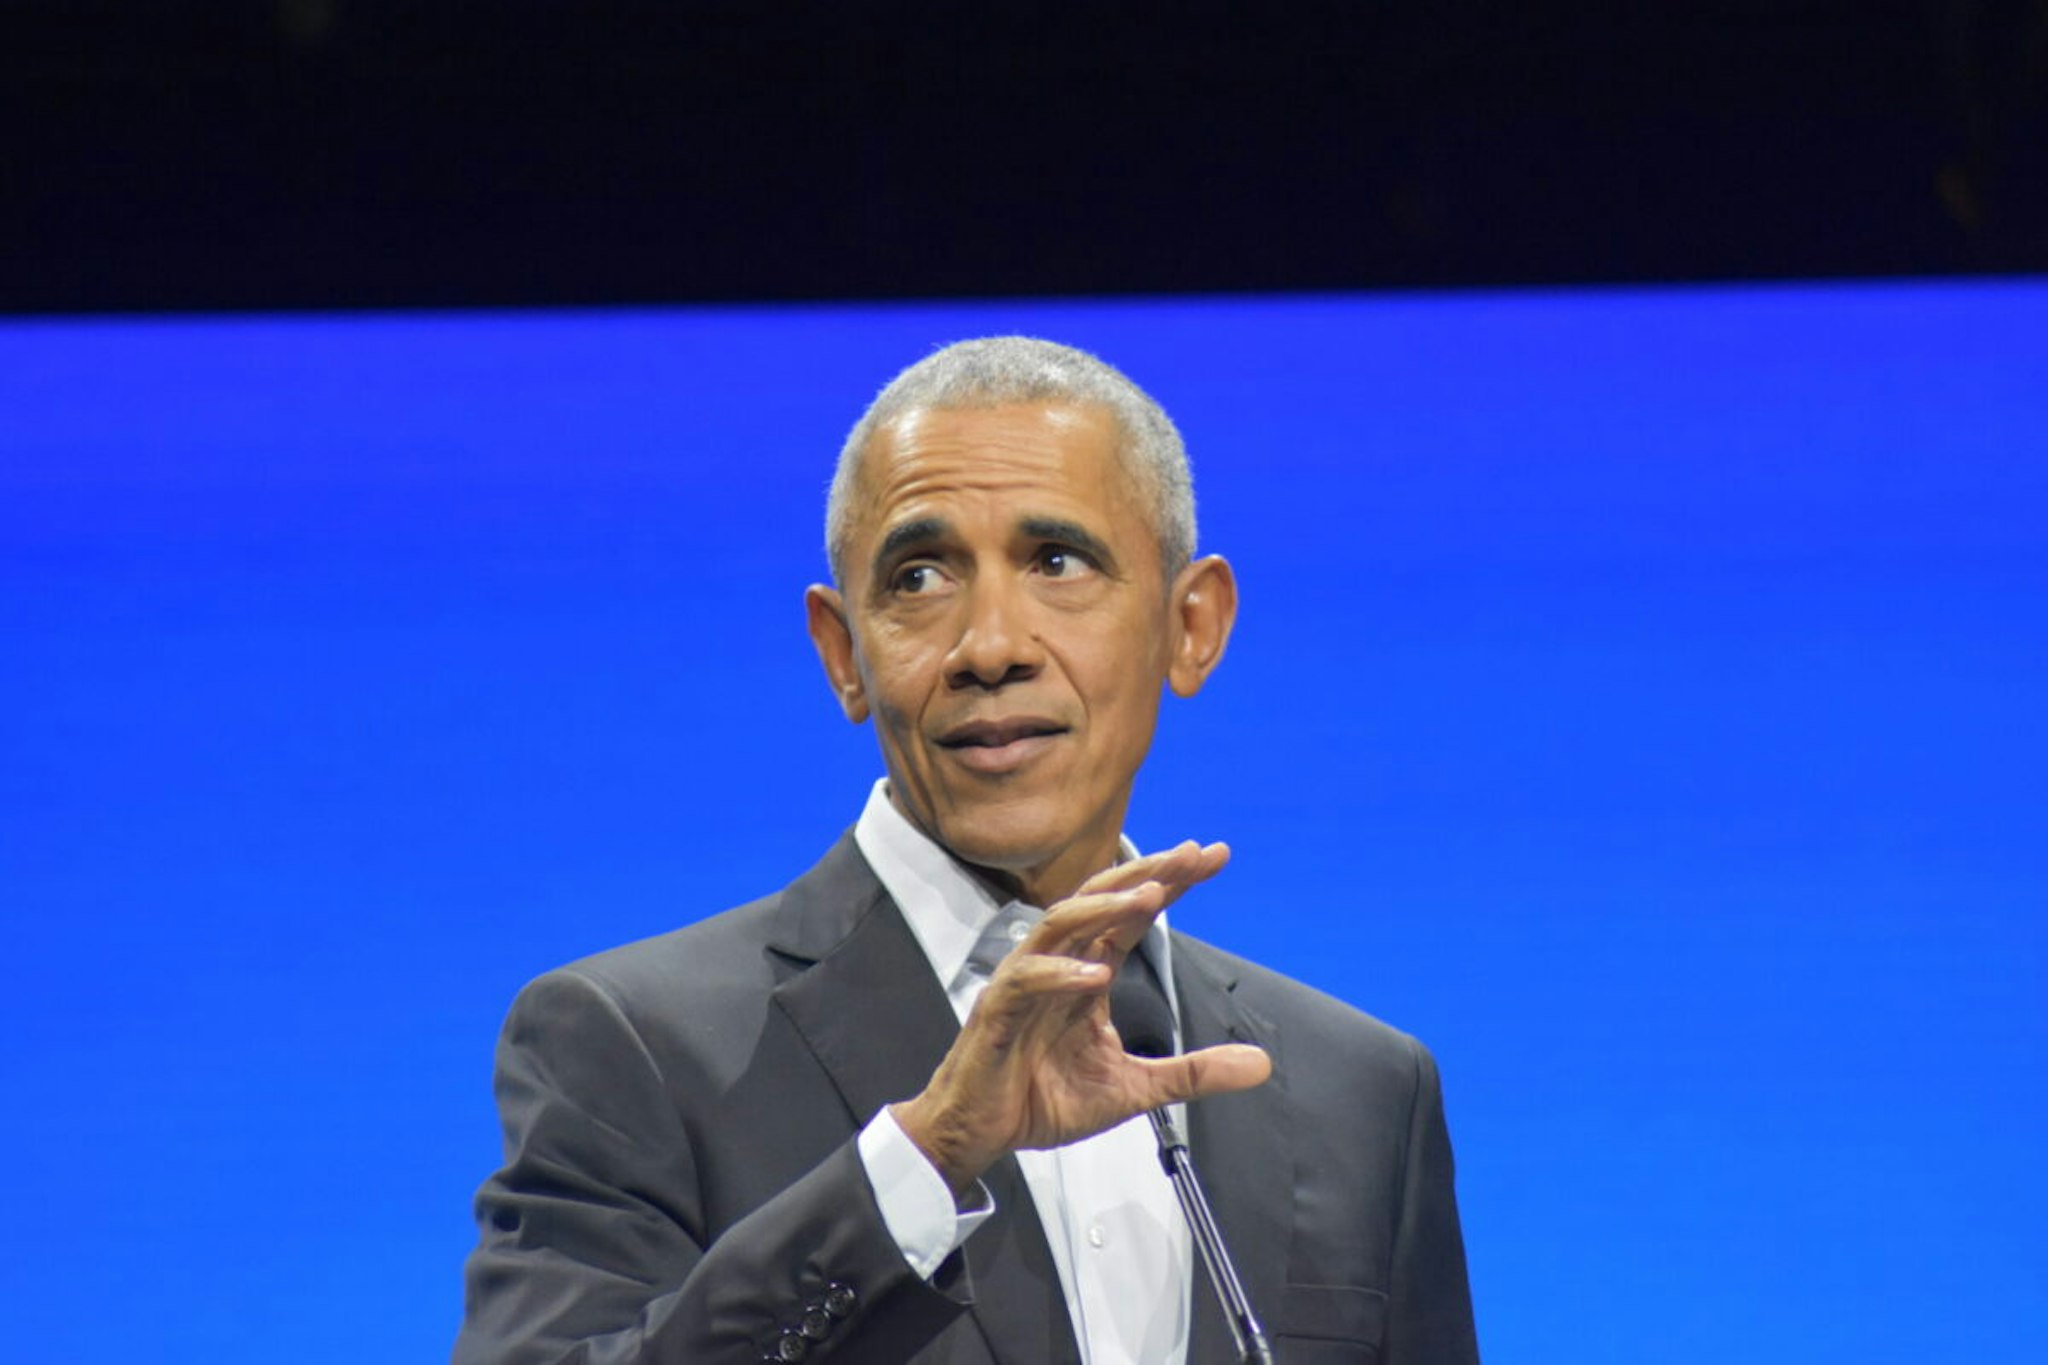 Former U.S. President Barack Obama delivers remarks at a Democracy Forum event held by the Obama Foundation at the Javits Center on November 17, 2022 in New York City, United States.